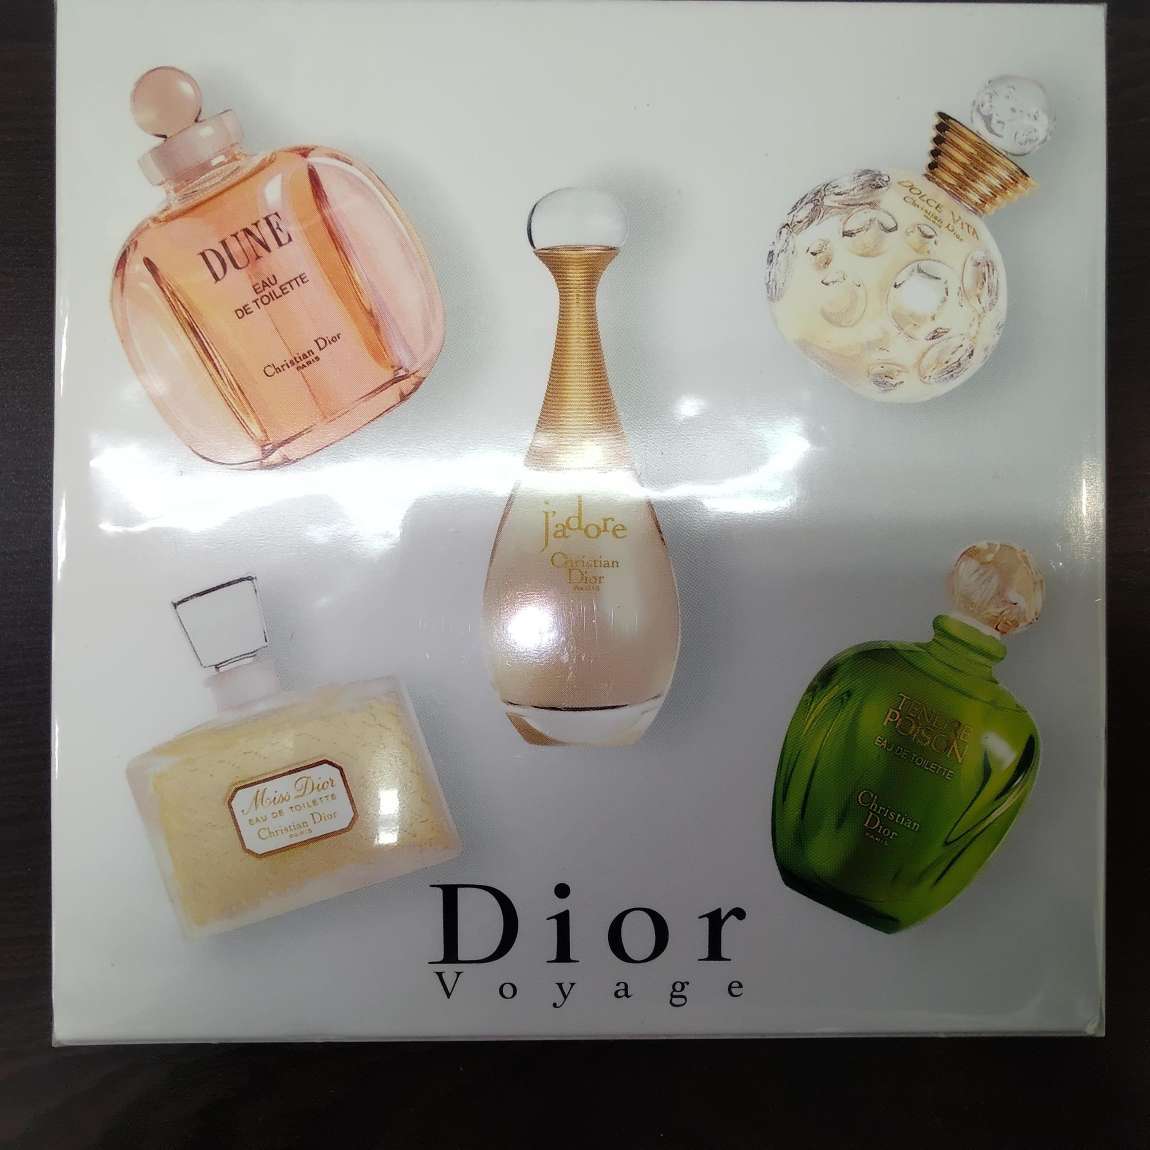 ♪♪#8564 Christian Dior voyage LES PARFUMS DE DIOR TRAVEL COLLECTION ミニボトル香水 5種類 各5ml 未開封品 ♪♪_画像1